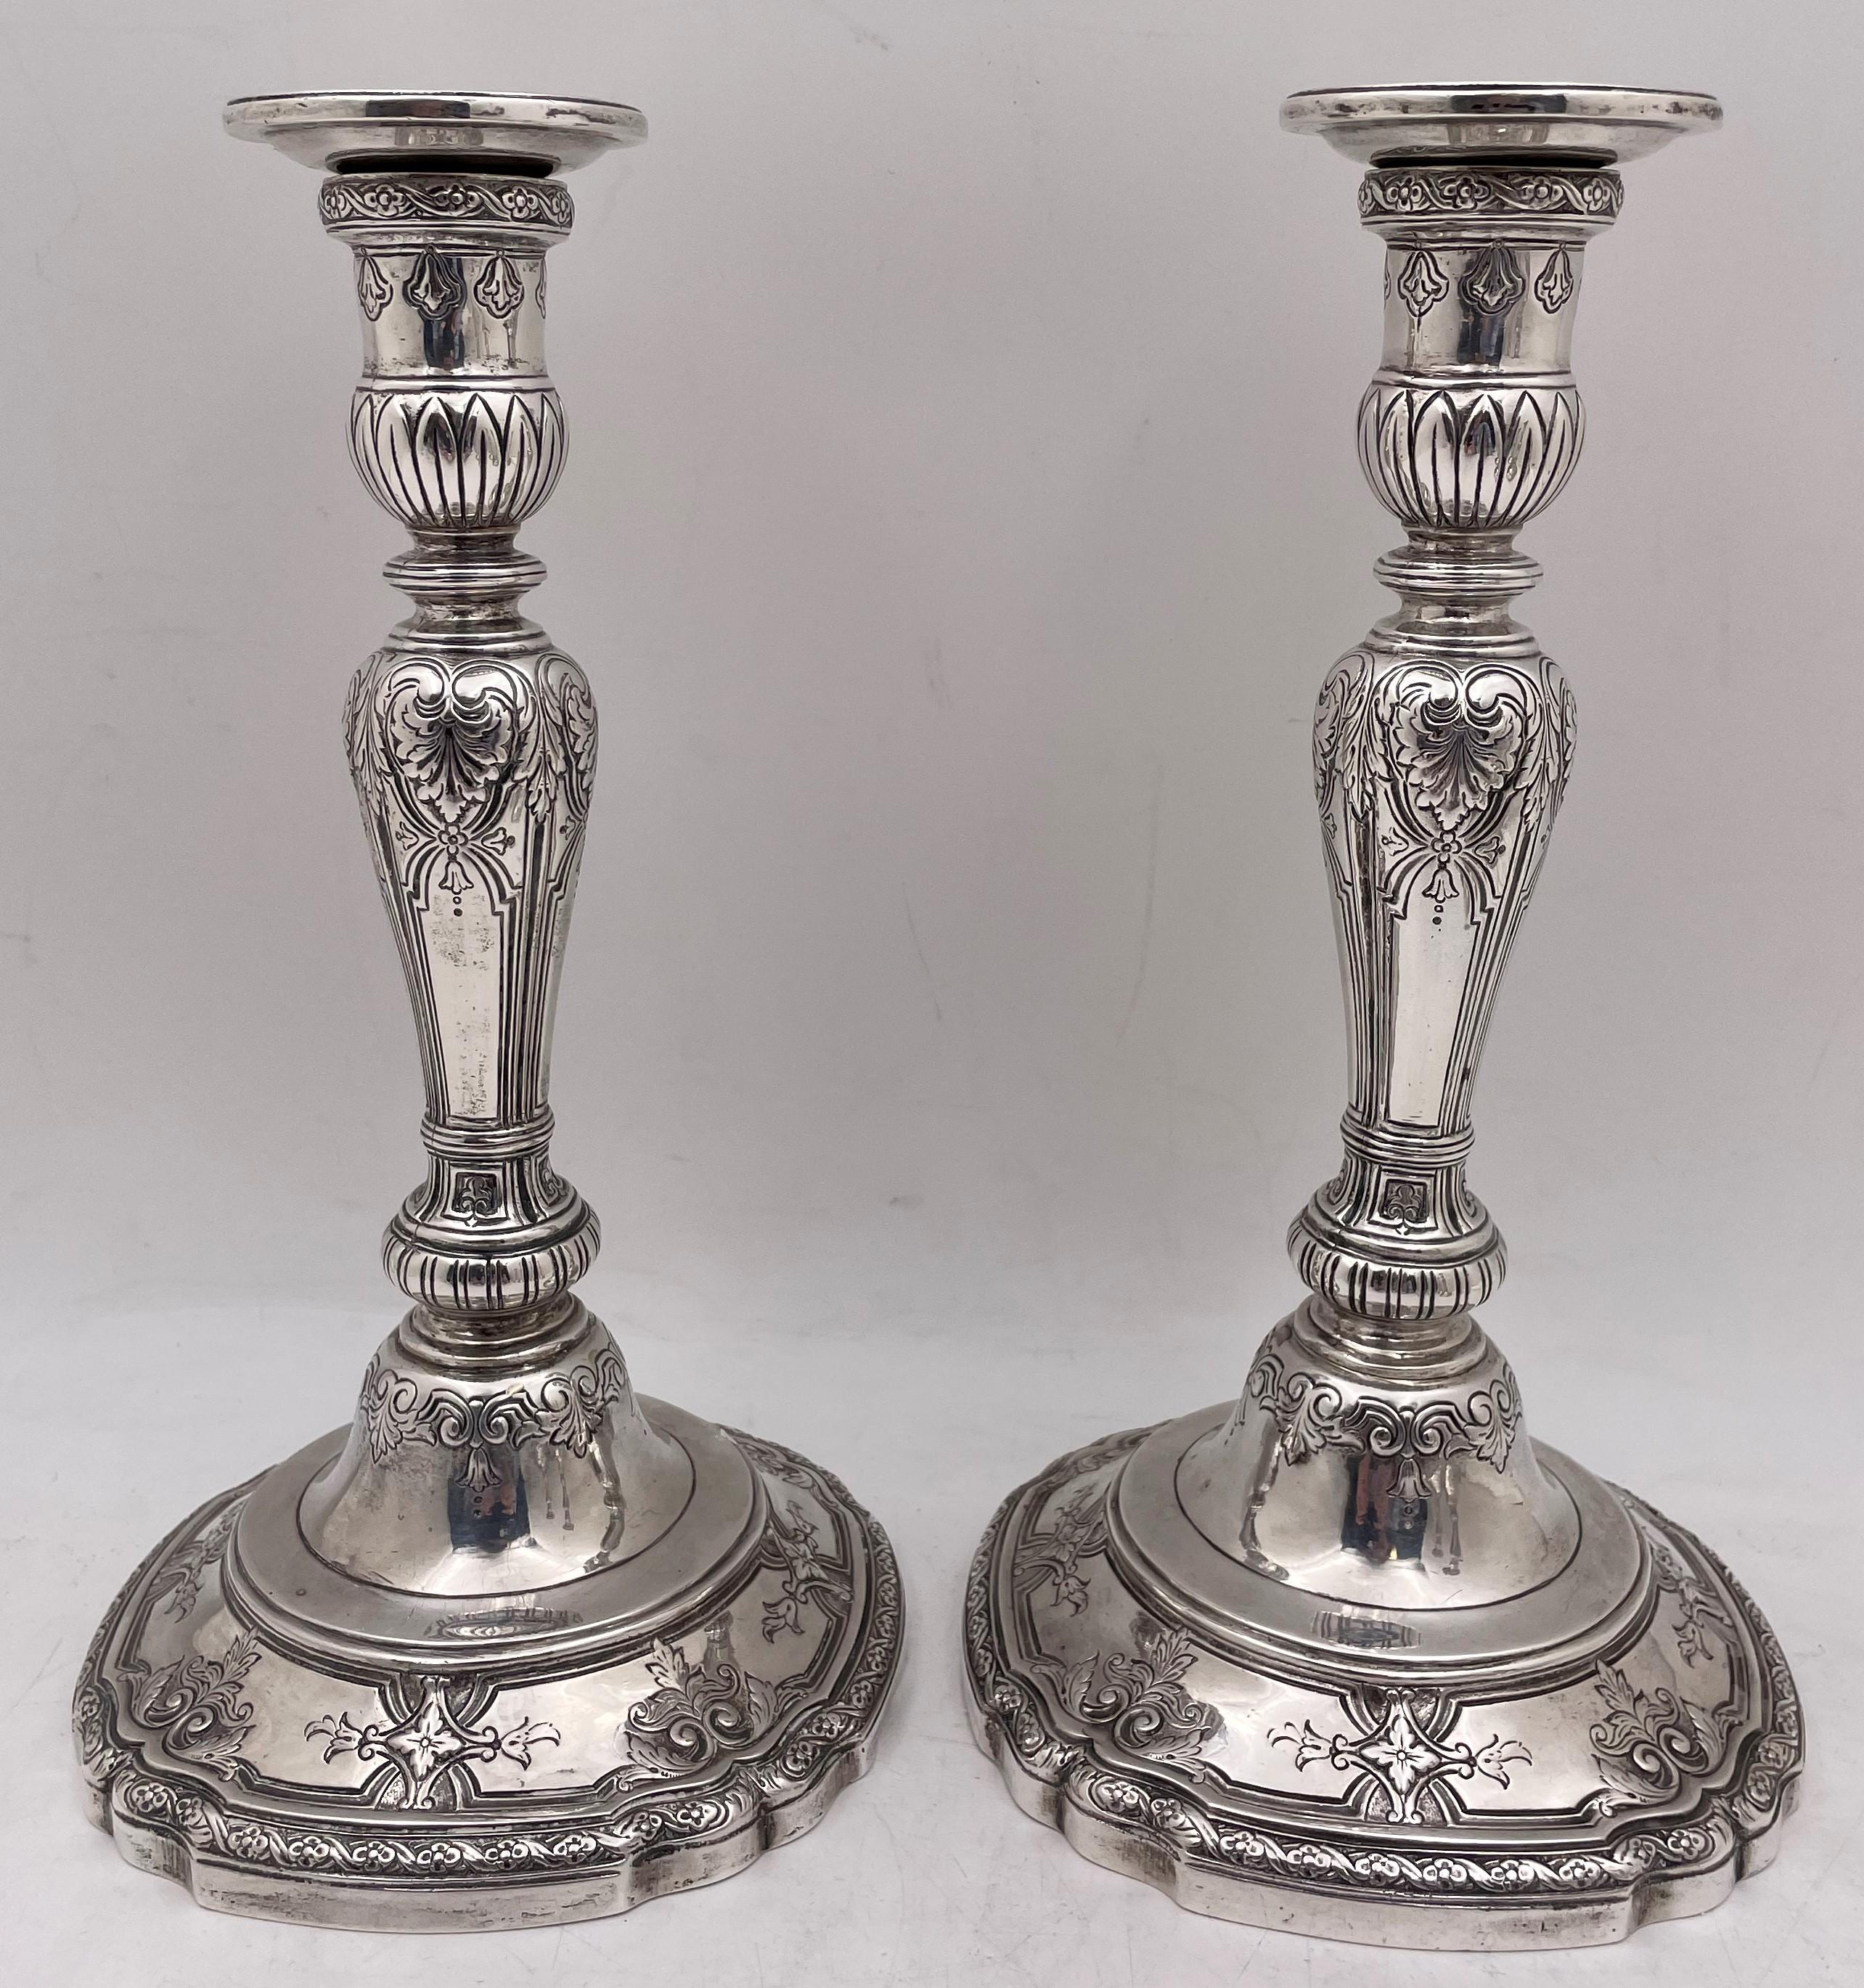 Roden Brothers, pair of Canadian sterling silver candlesticks, from the early 20th century, showing beautifully ornate floral and natural motifs and with removable bobeches. These high-quality candlesticks, with a heavy gage, measure 10'' in height